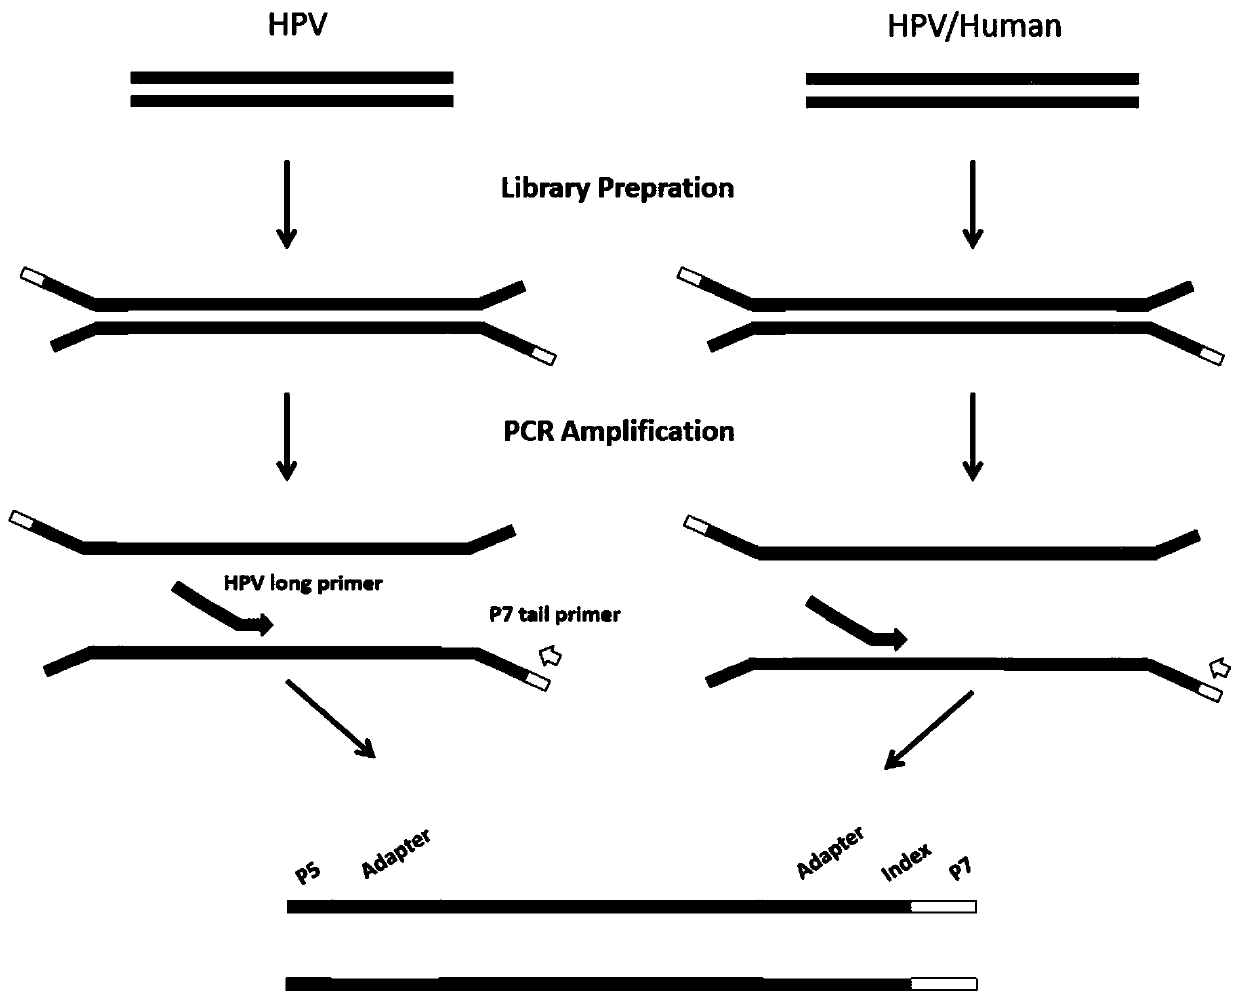 Amplification and sequencing method for identification of various HPV types and genomic integration analysis